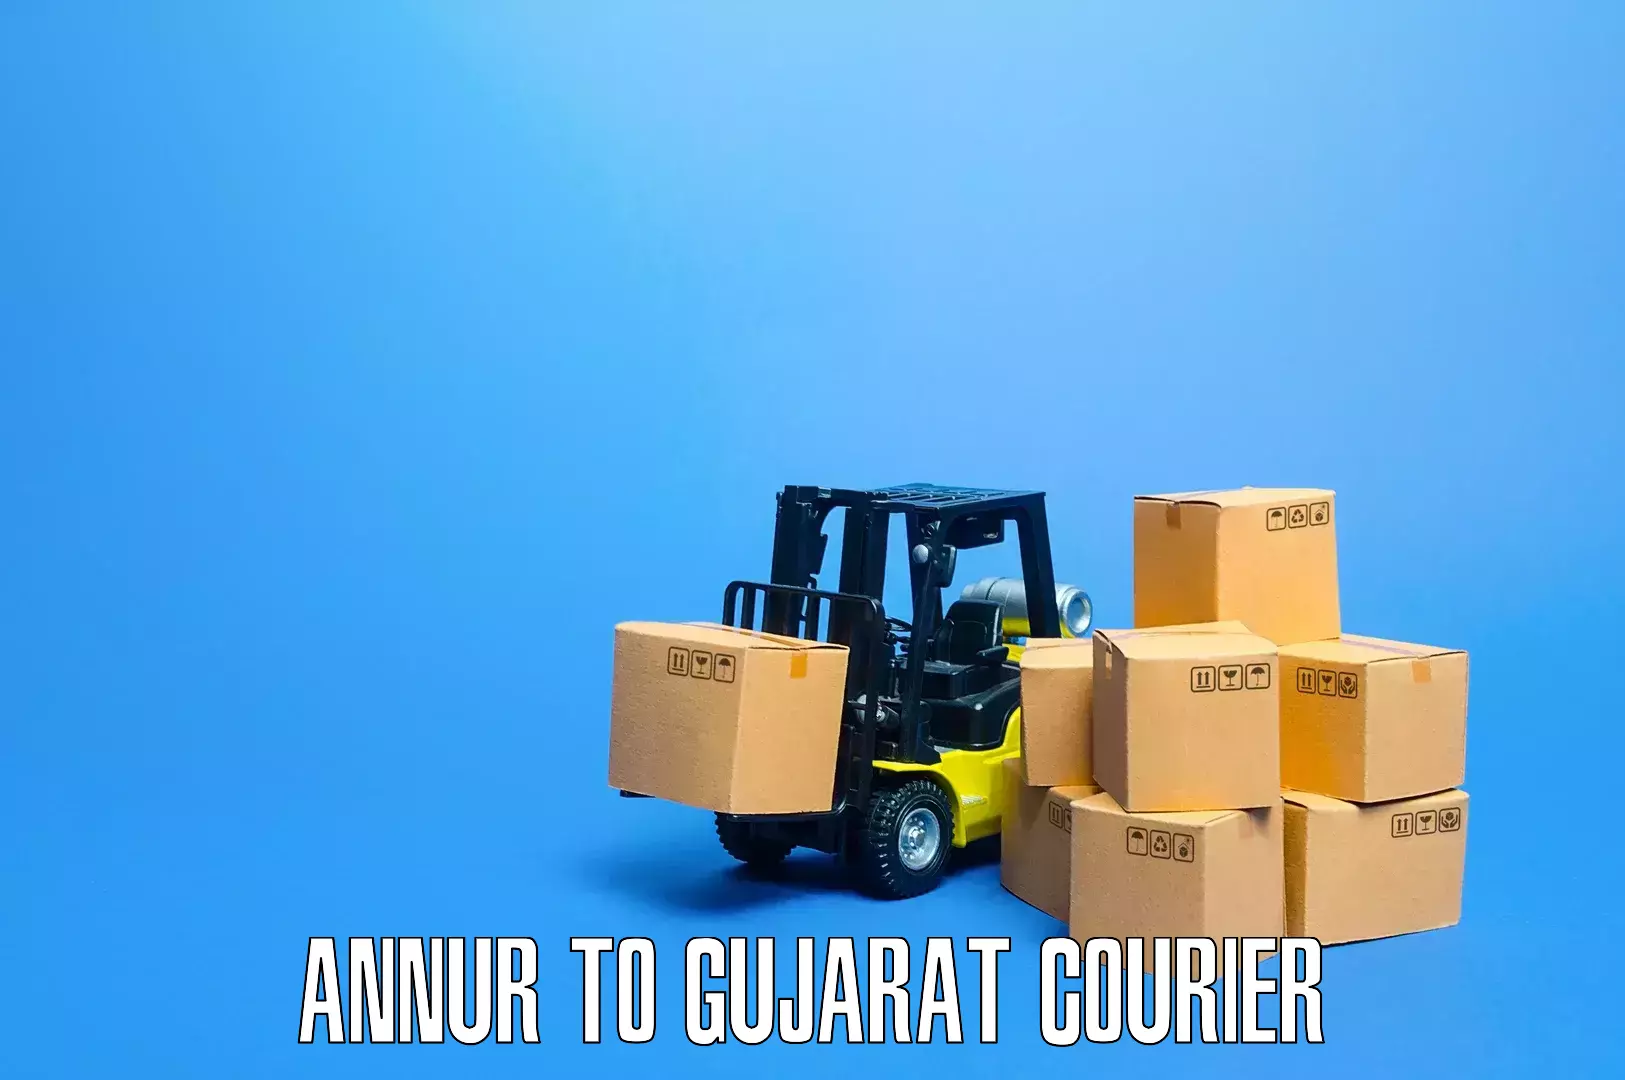 Packing and moving services Annur to Vadodara